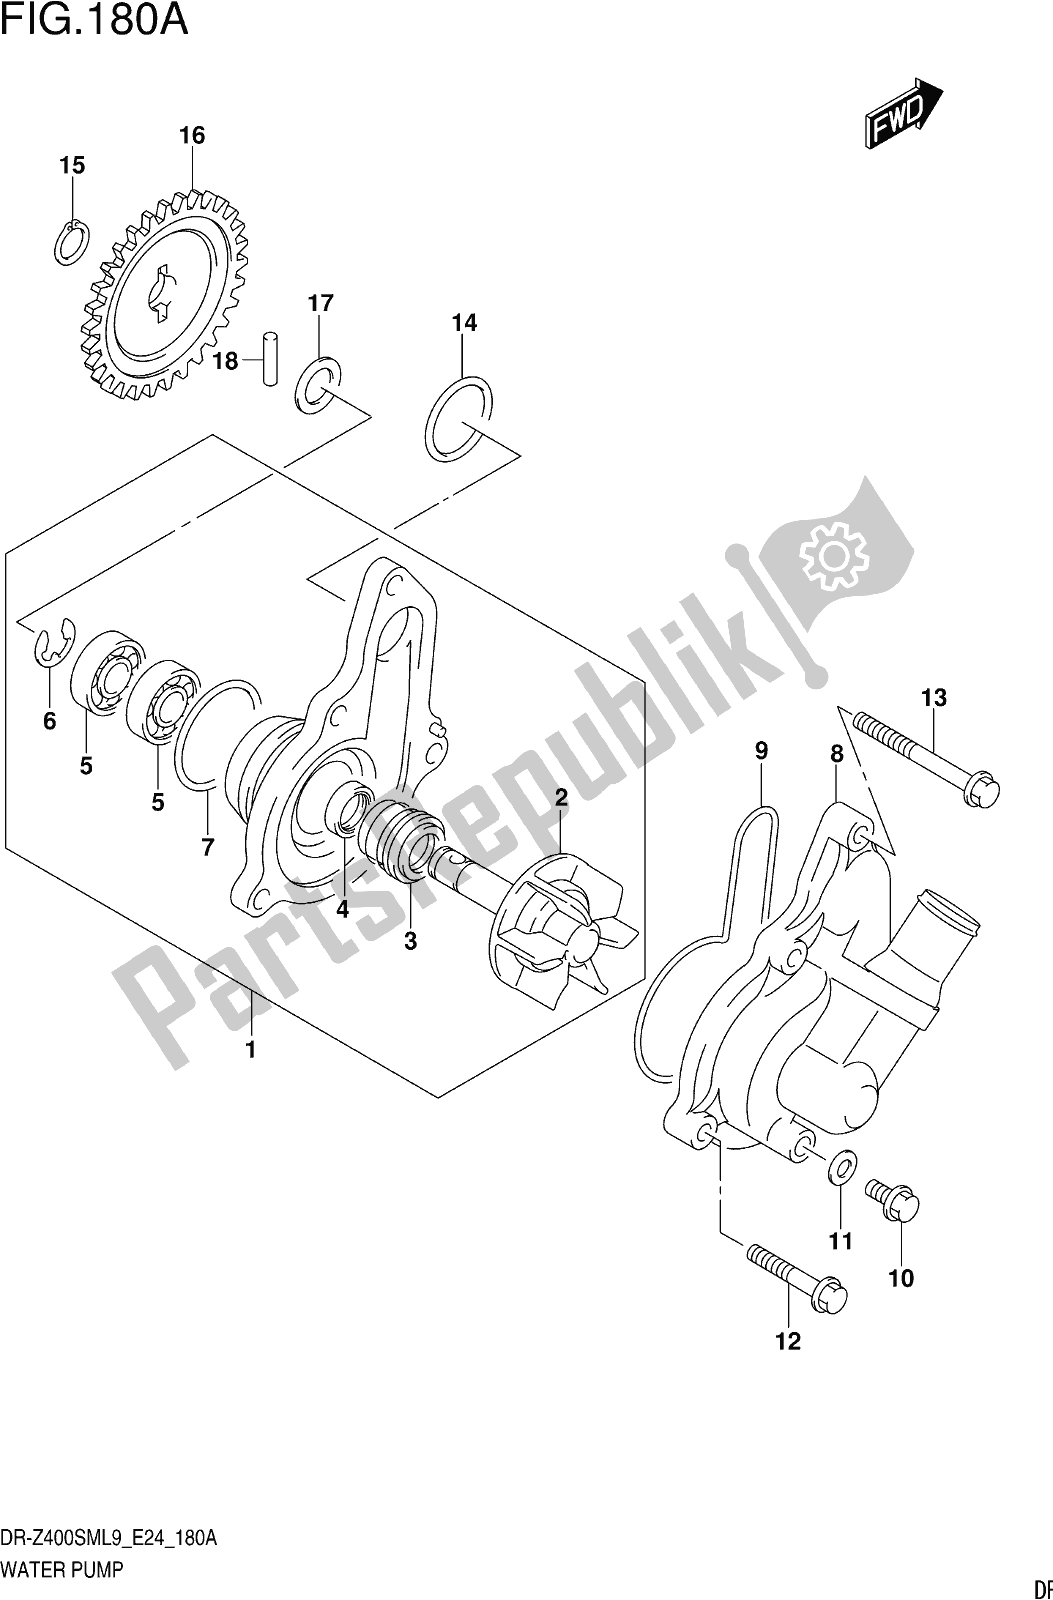 All parts for the Fig. 180a Water Pump of the Suzuki DR-Z 400 SM 2019